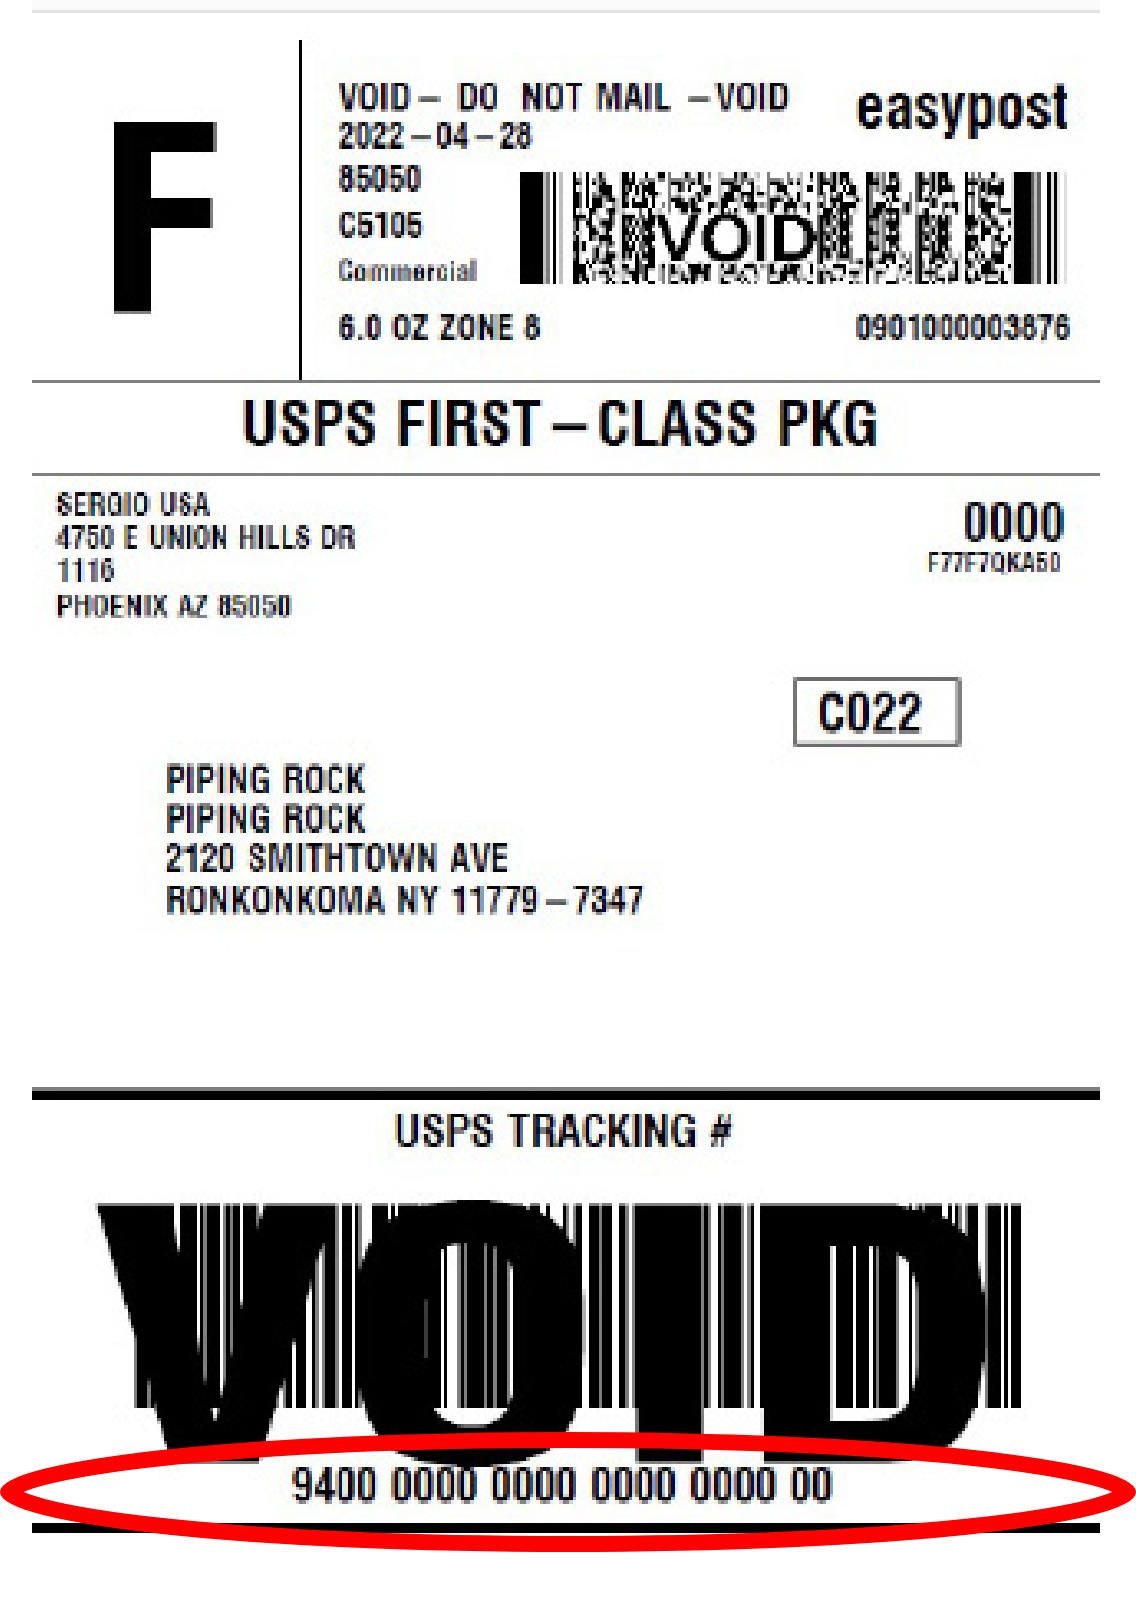 Example label with tracking number on bottom